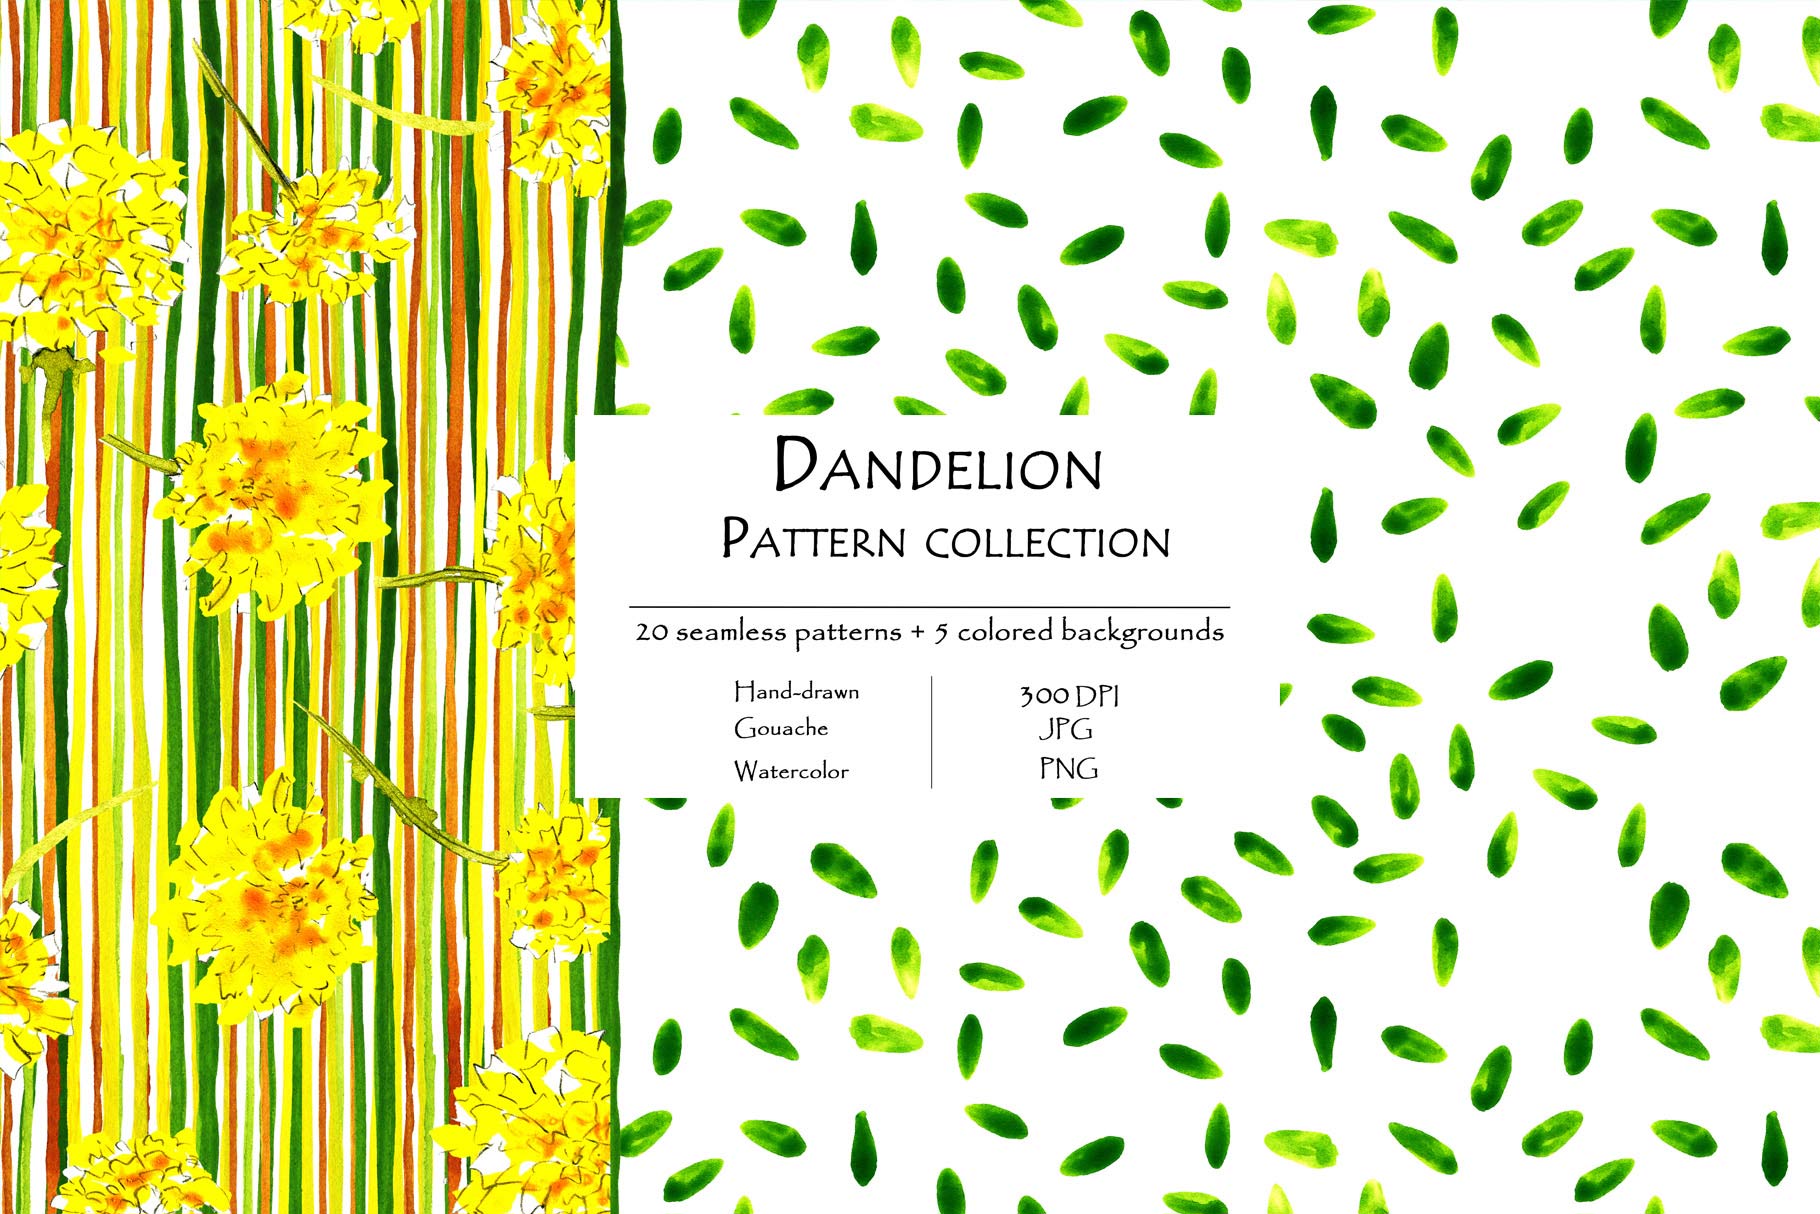 Dandelion Pattern Collection Of 20 Seamless Patterns And 5 Colored Background Pattern Background.